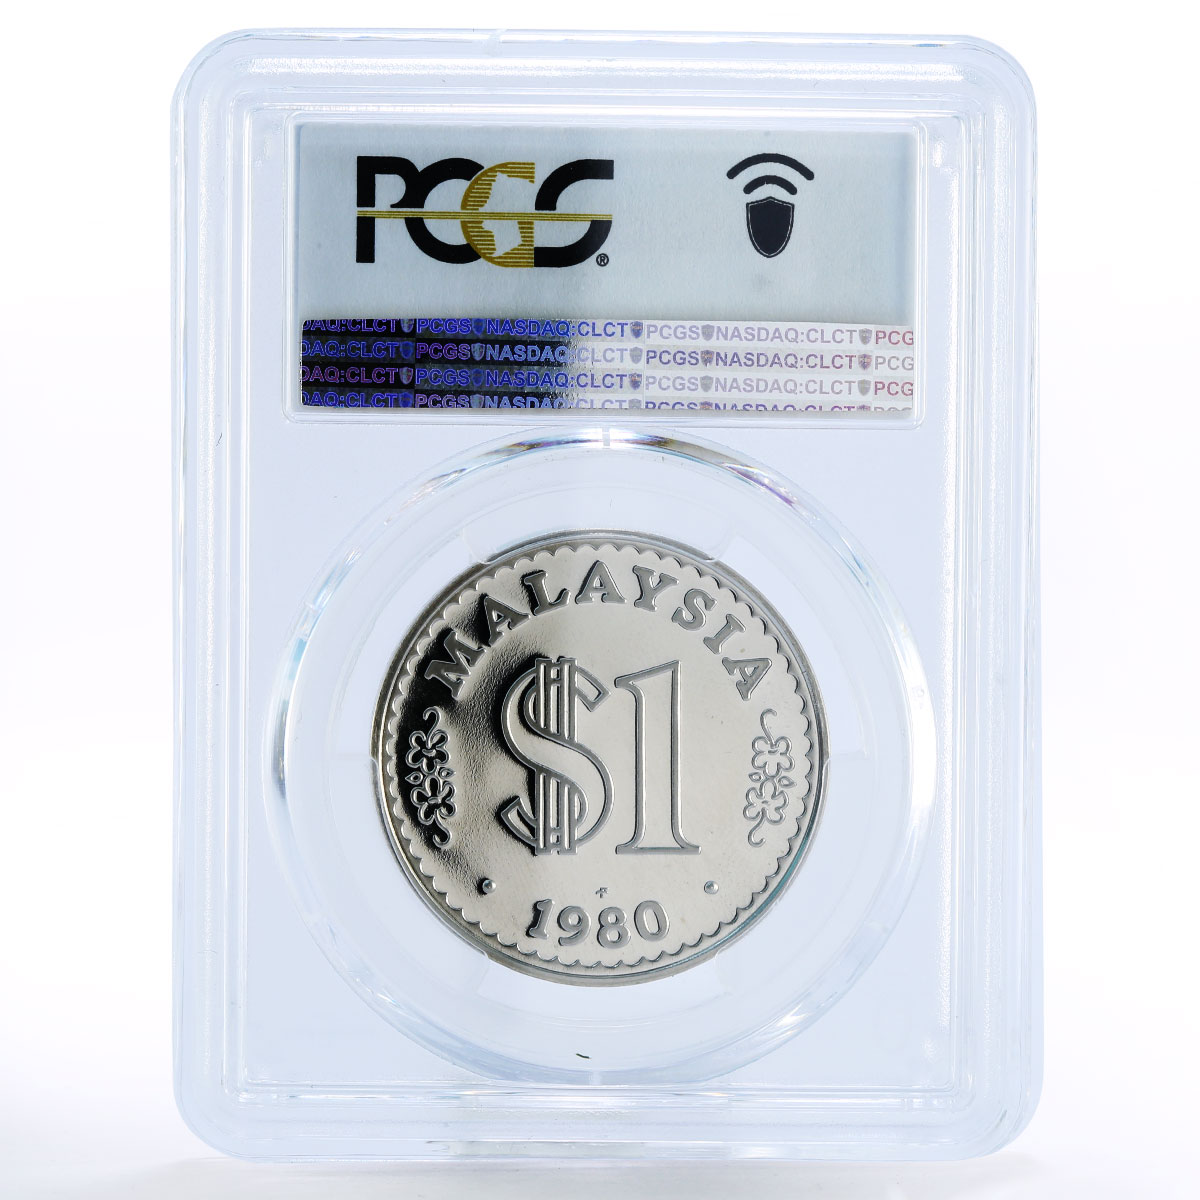 Malaysia 1 ringgit Government Building PR69 PCGS CuNi coin 1980